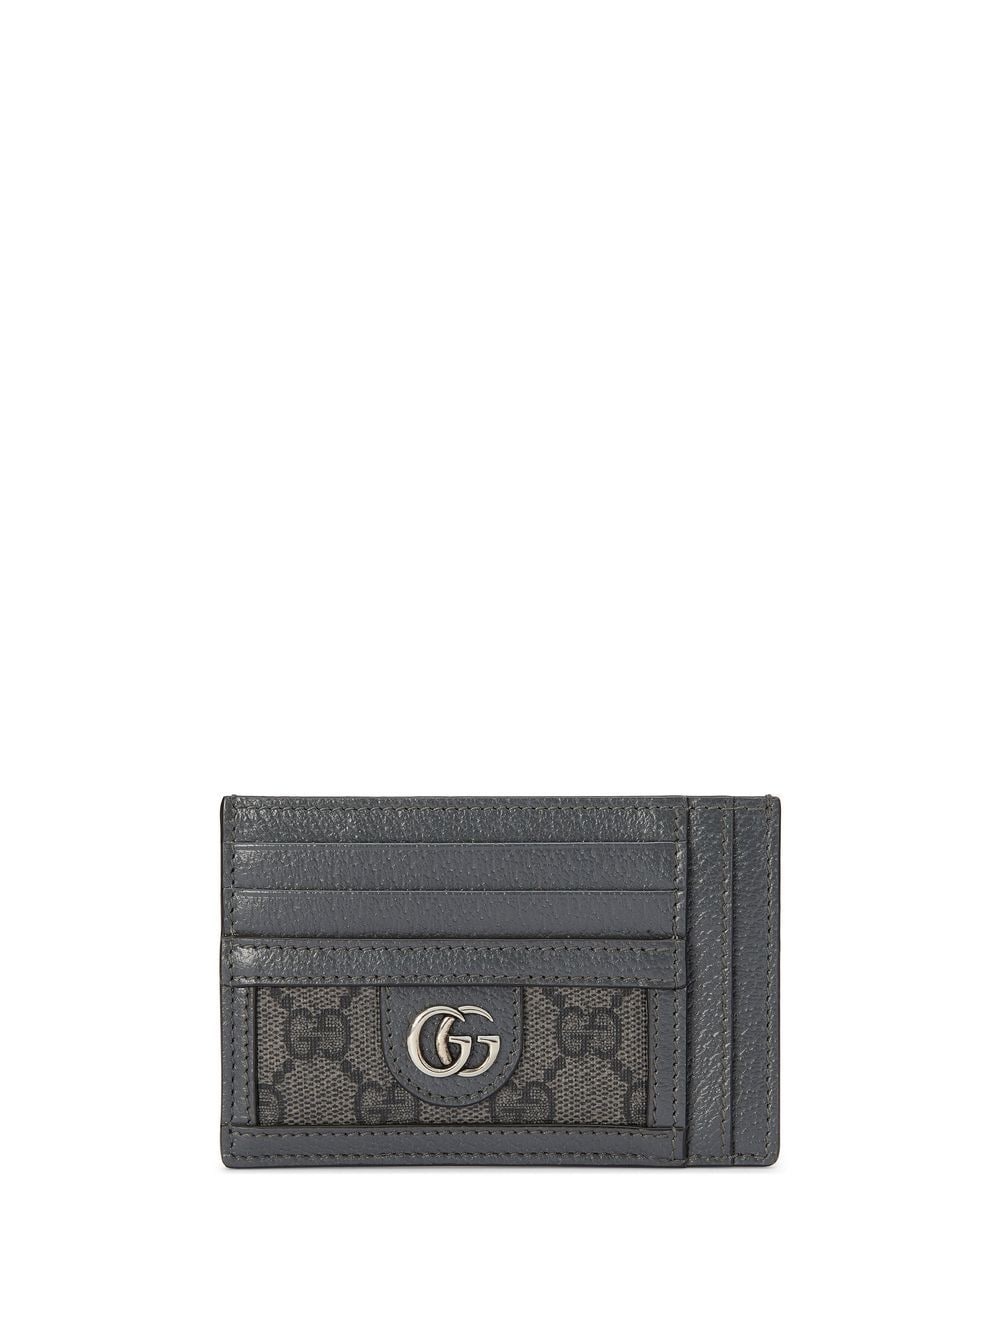 Ophidia credit card case - 1